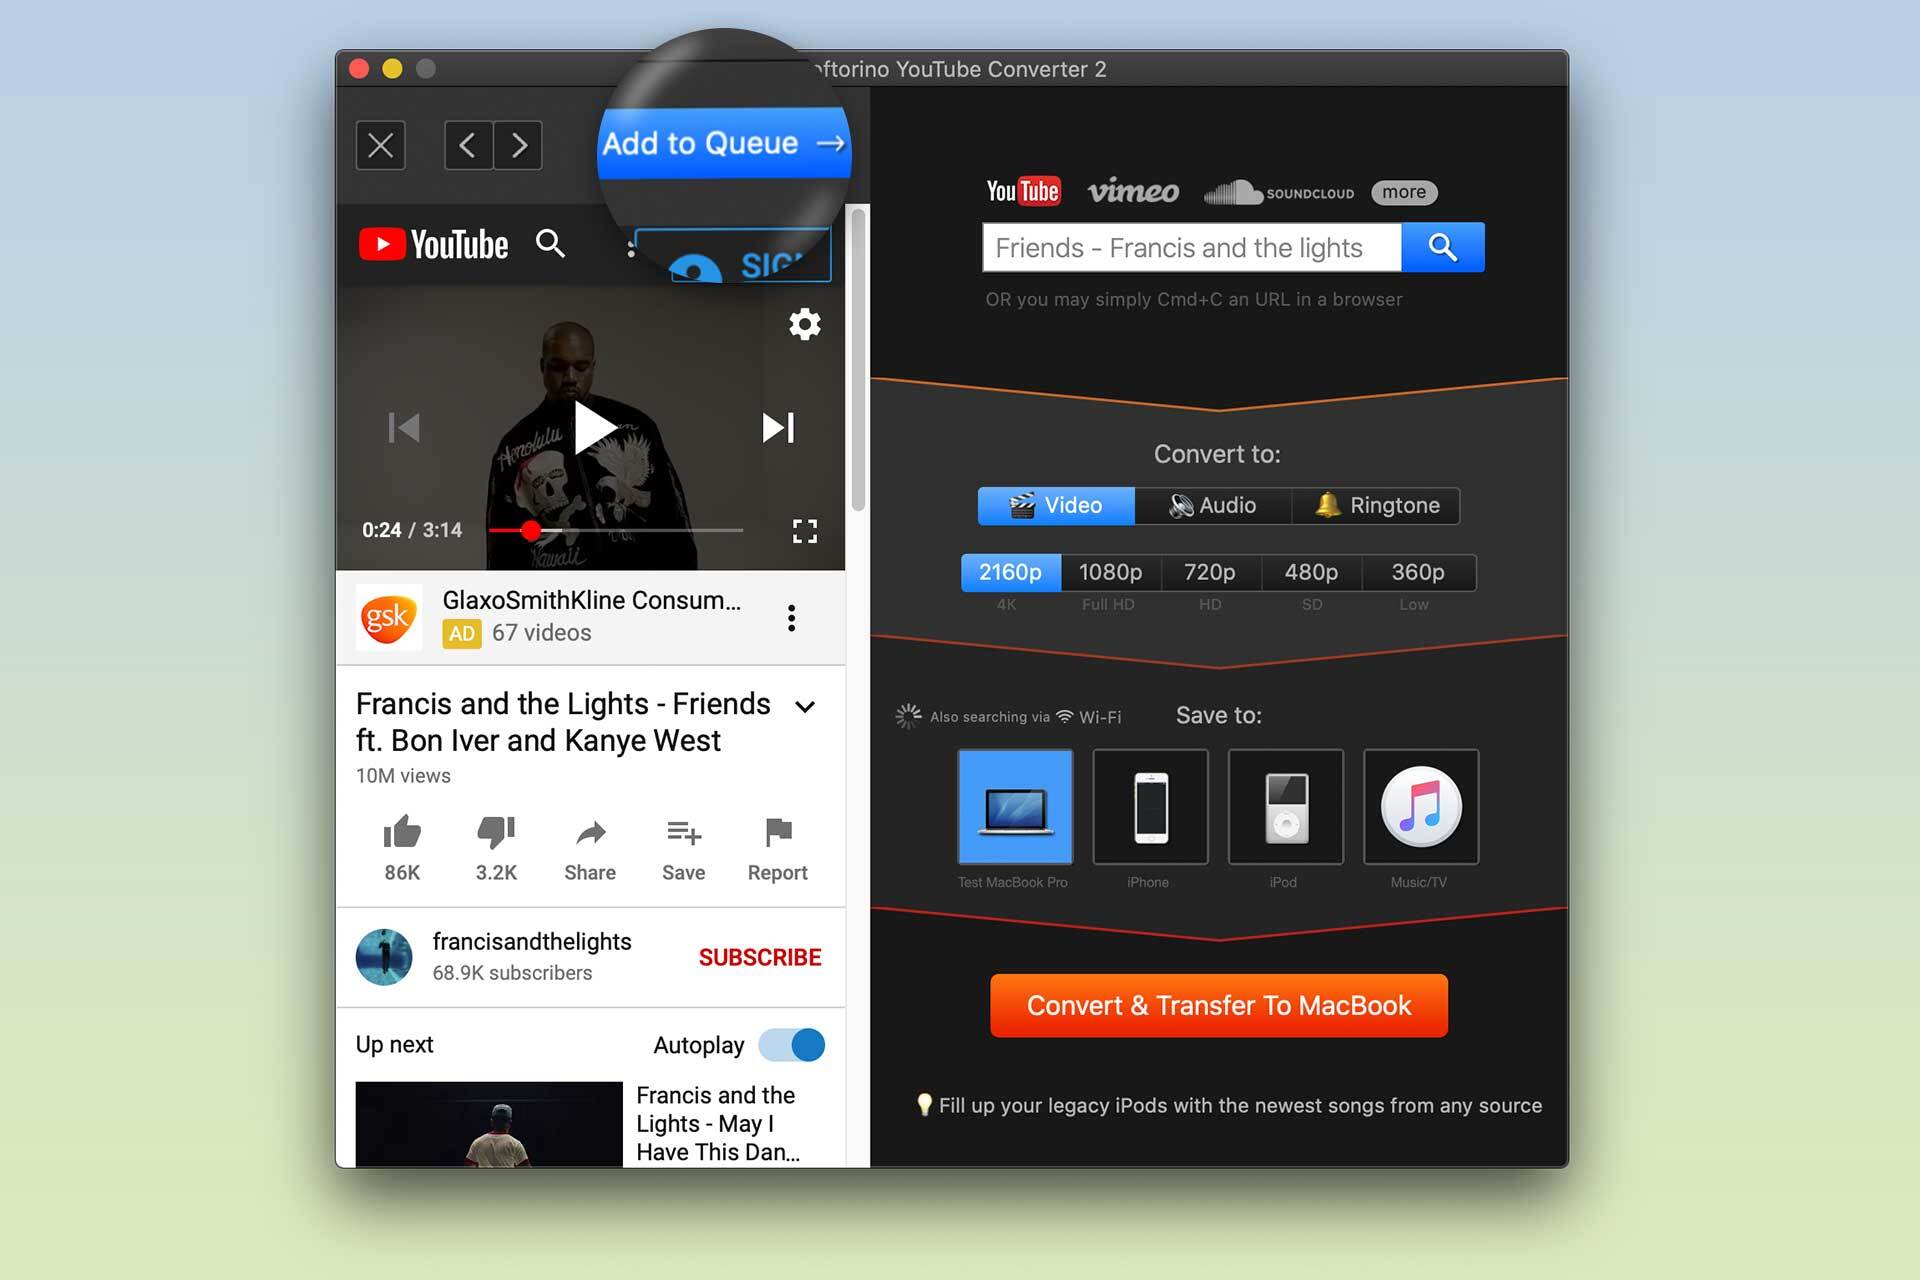 Ht Syc2 Build A Free Music Library With Youtube Converter 2